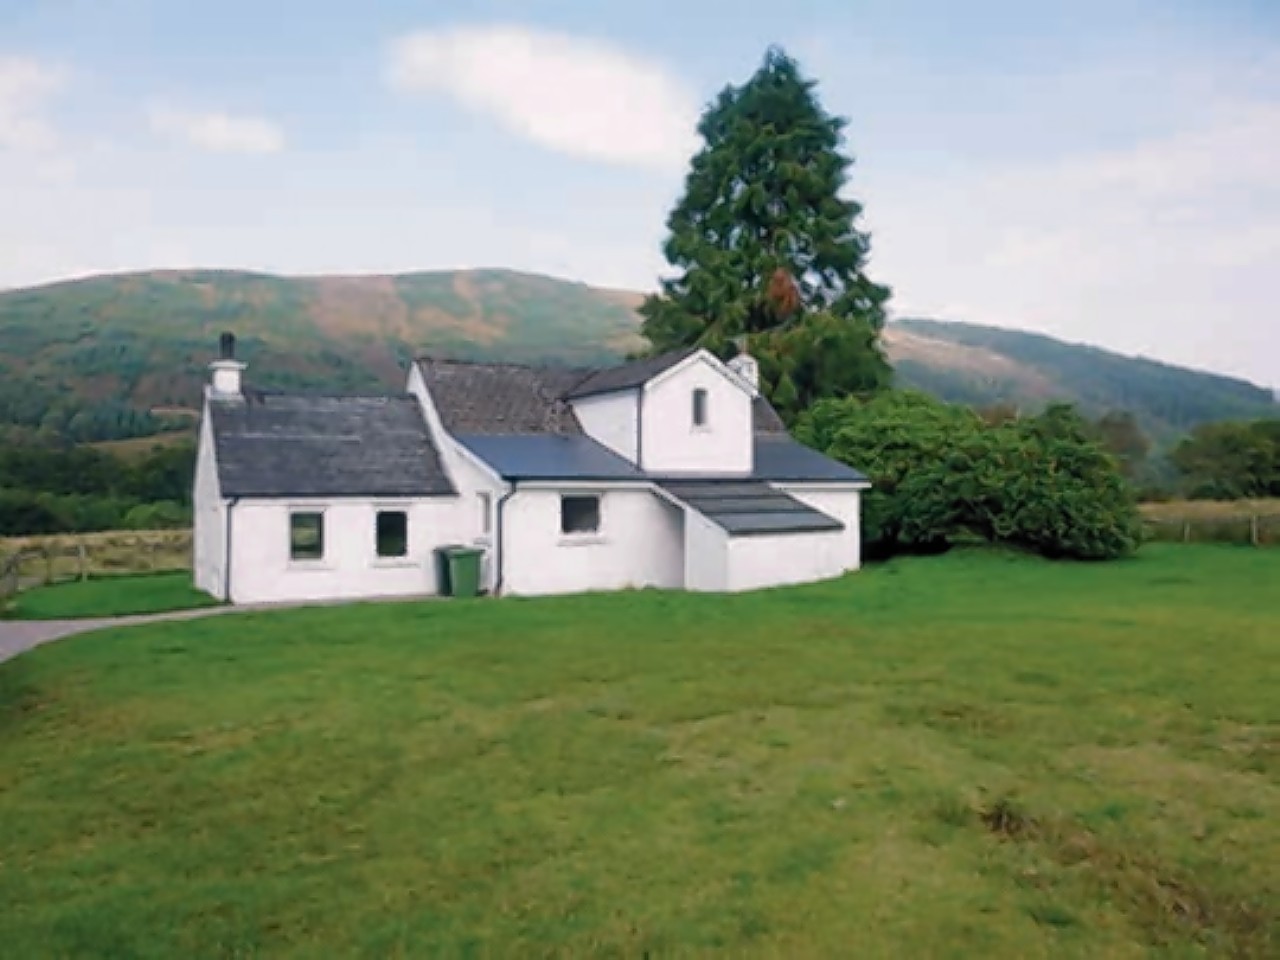 The property next to the River Lochy